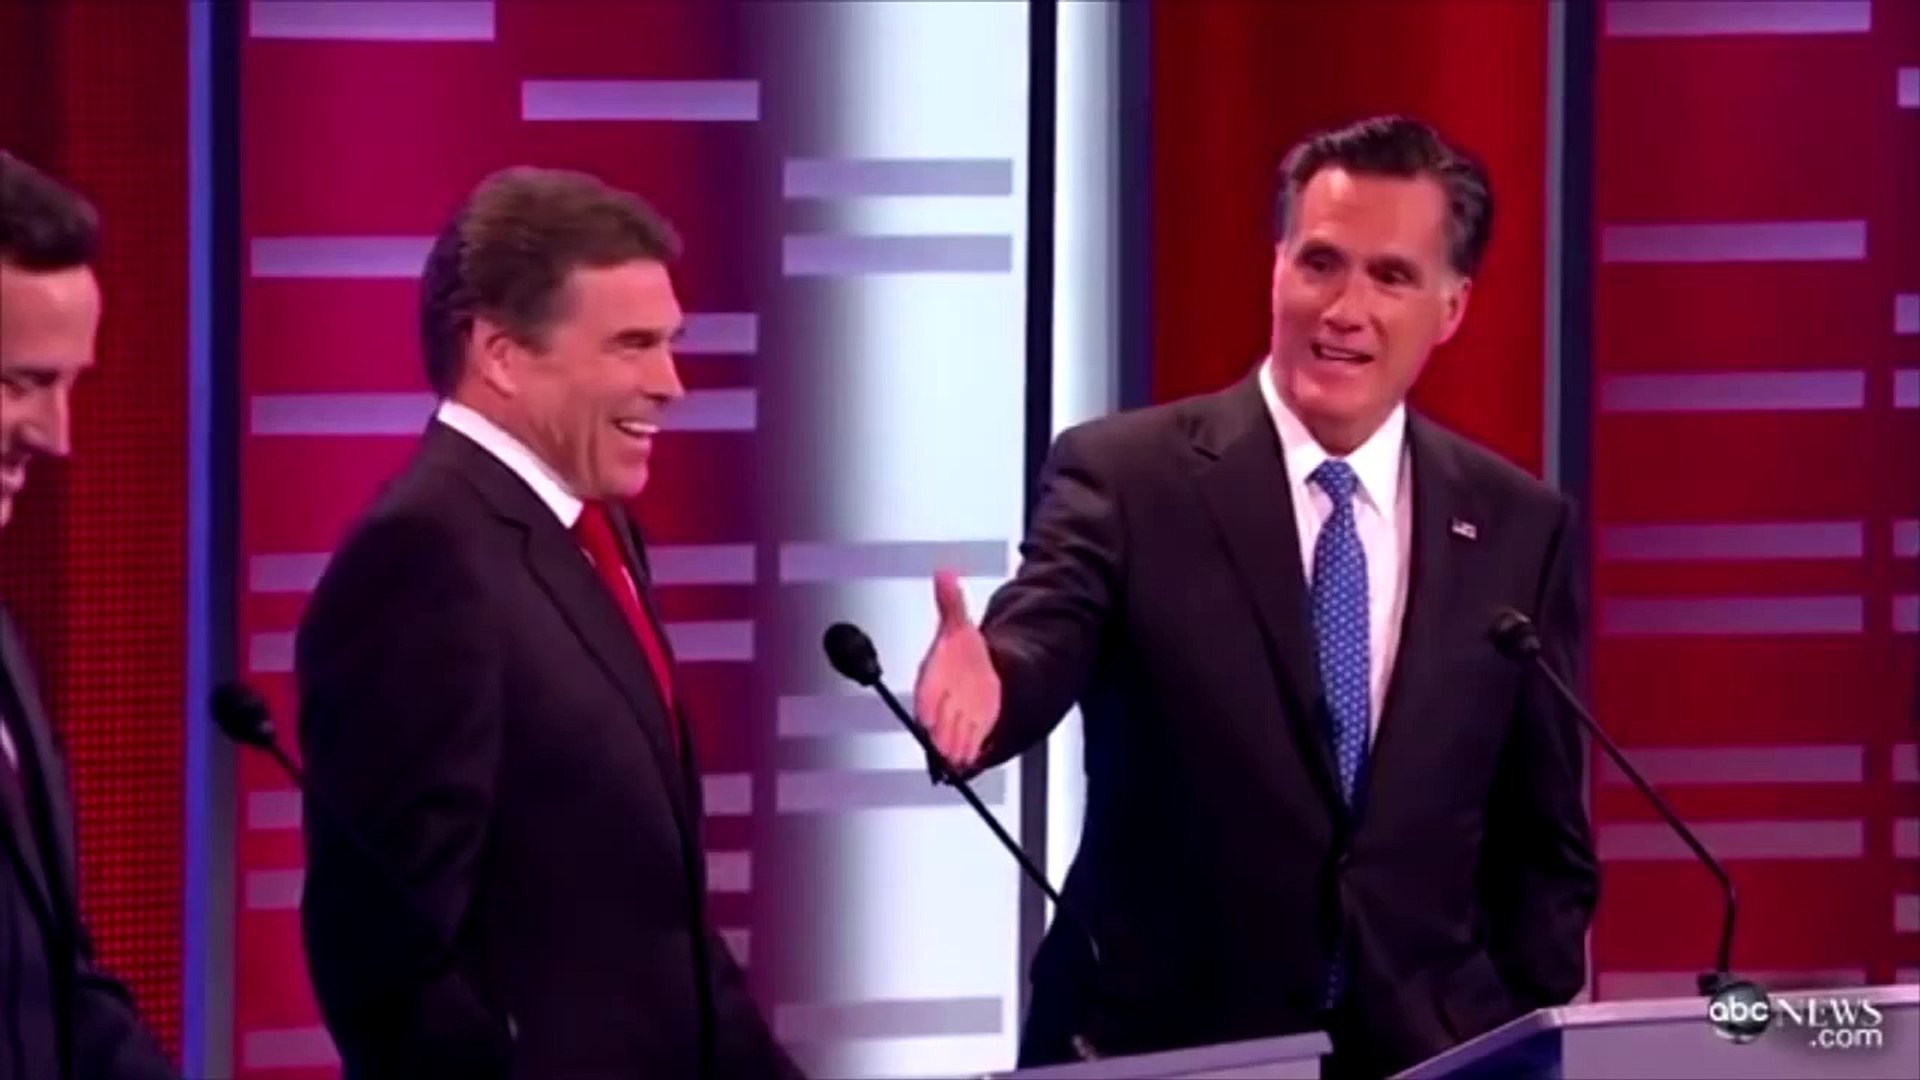 Unsanctioned Campaign Video [feat. Herman, Rick, Mitt and Newt]